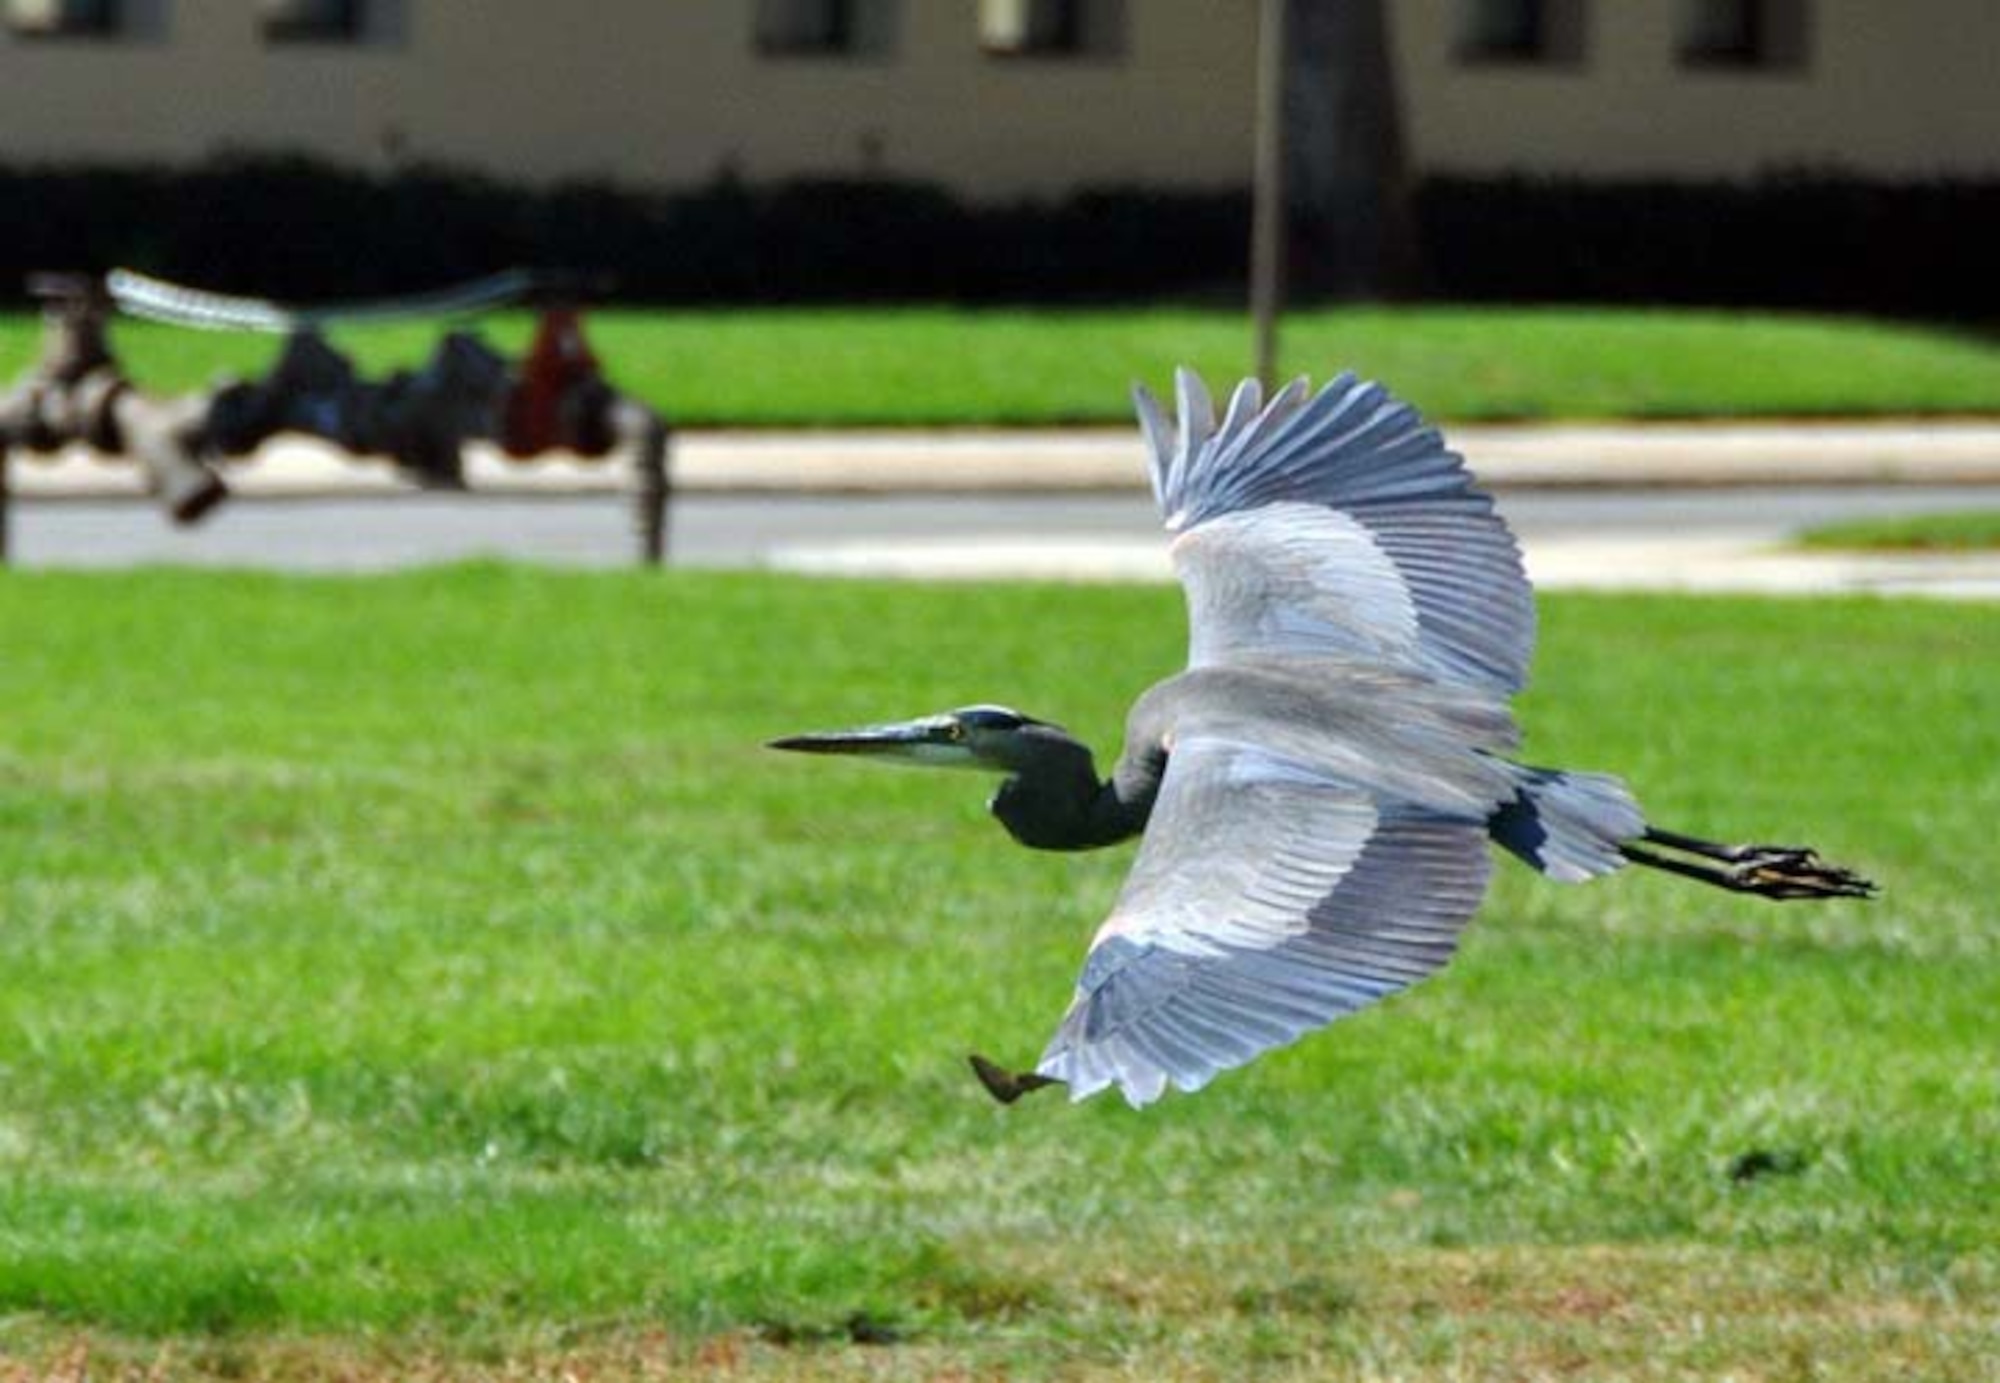 The Great Blue Heron makes an early-morning pass over the parade field at March Air Reserve Base, Calif., in search of food. This protected species of migratory bird is spotted in various locations on base throughout the day and does its best to help control the rodent population here. (U.S. Air Force photo by Linda Welz)
